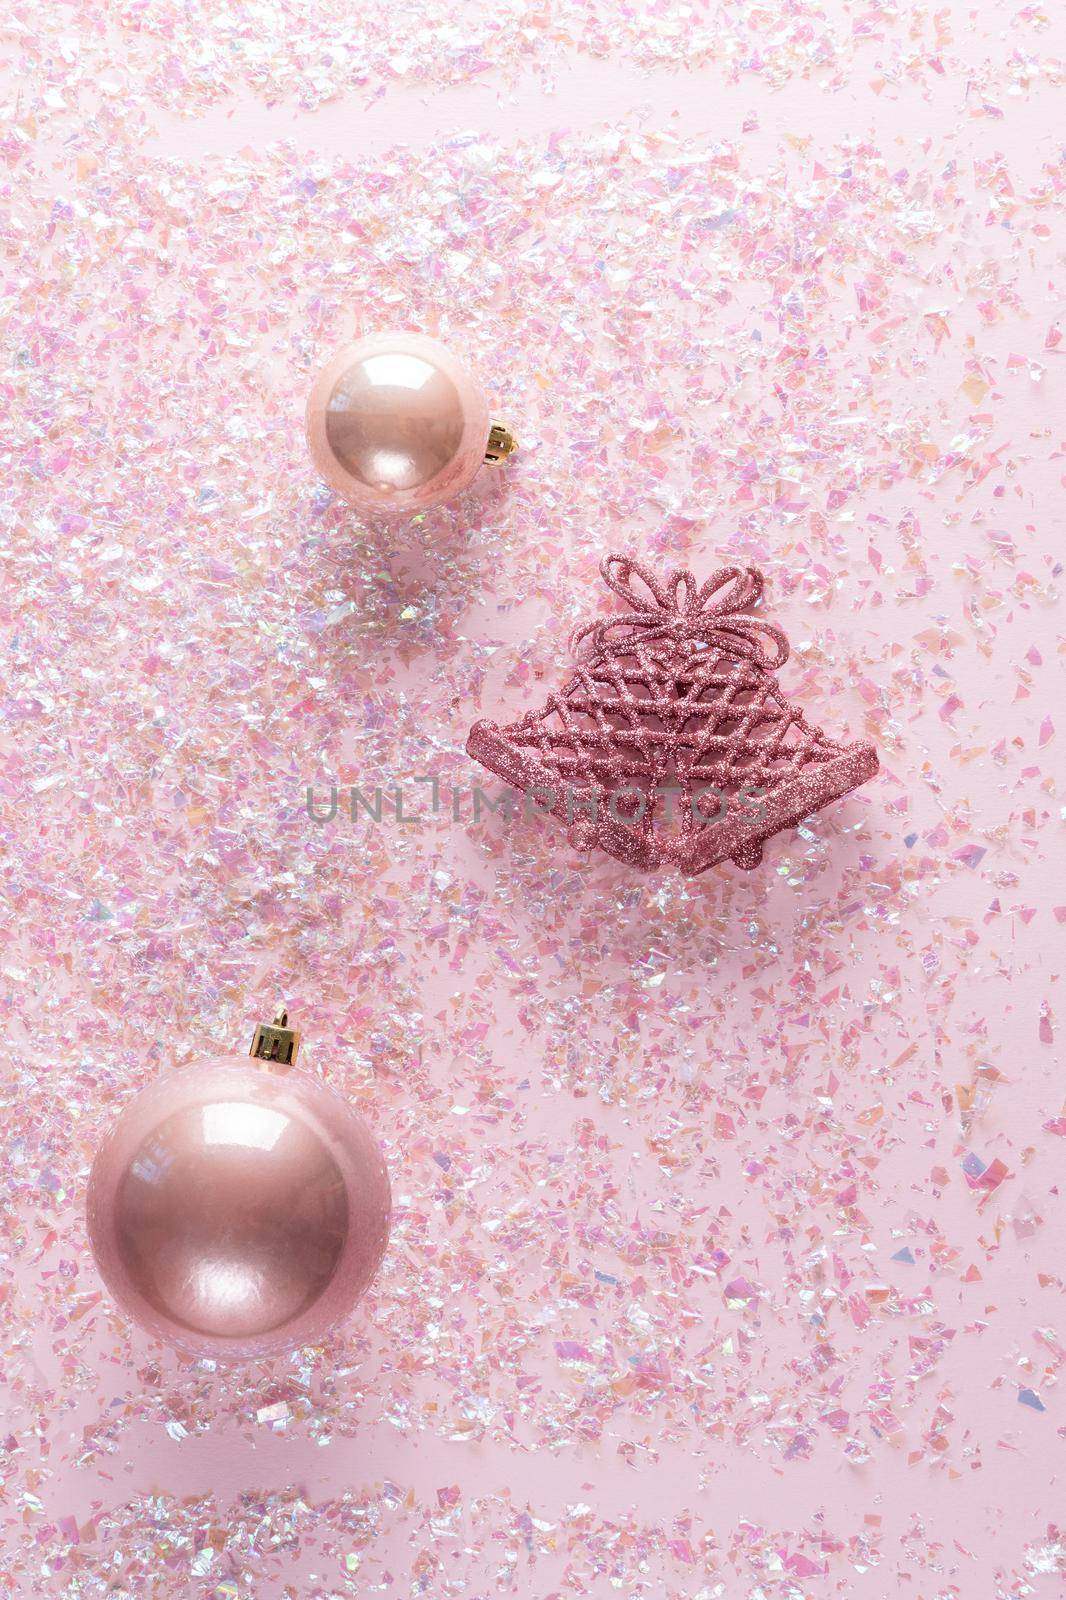 Christmas ornaments decorations background. Classic glitter snowflakes